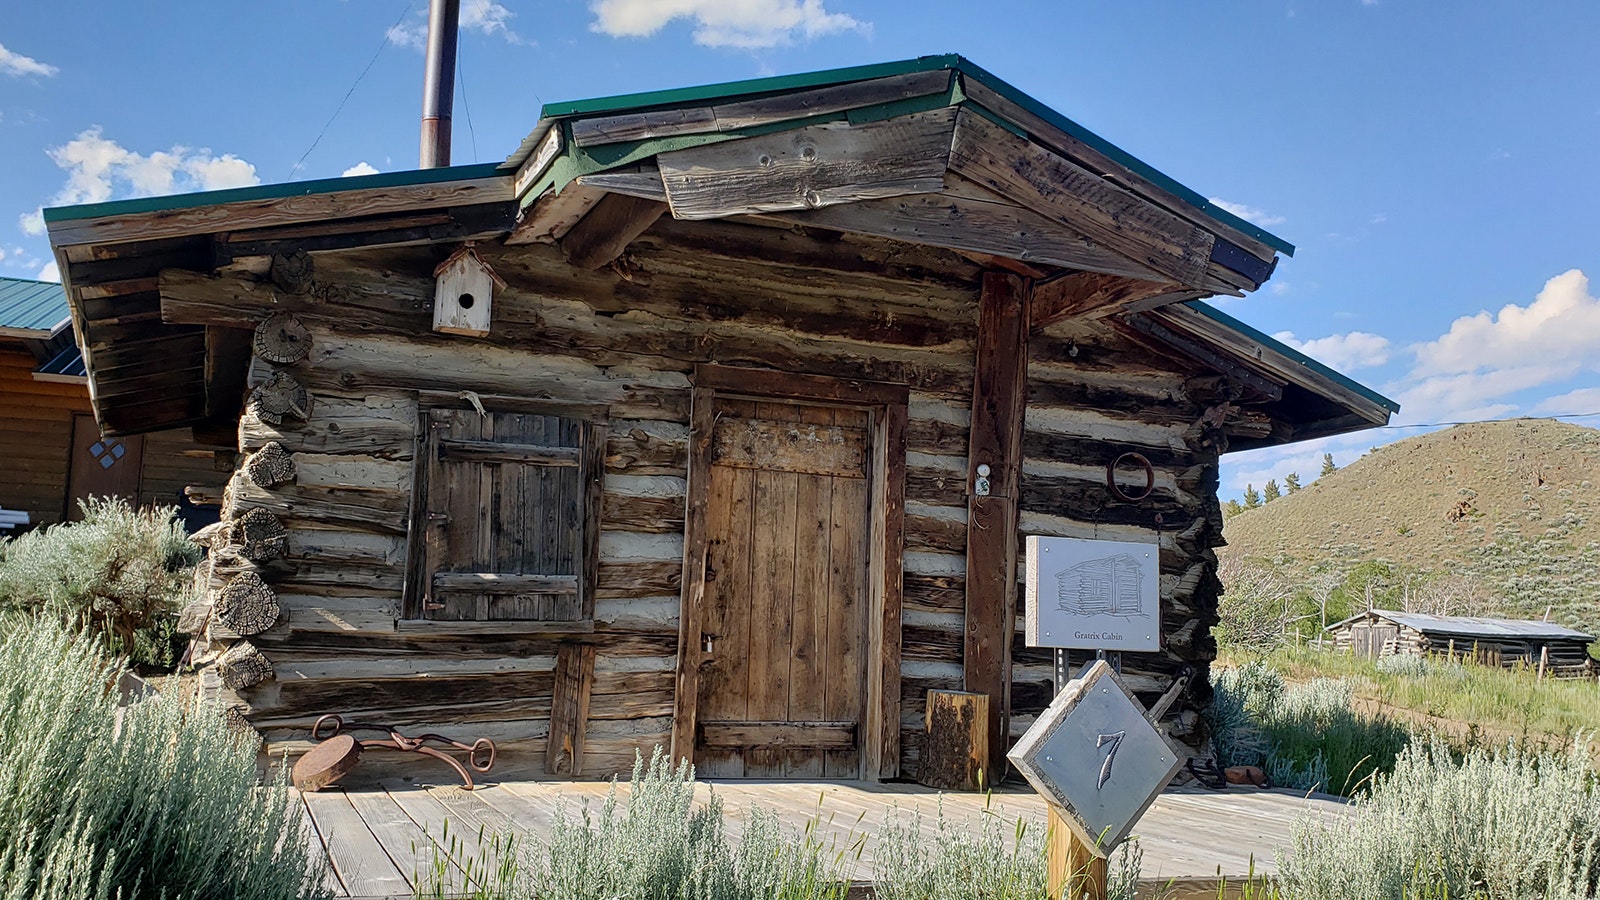 Some historians believe this is the oldest cabin still standing in Wyoming. Built or moved to this location in 1842, it was once a waypoint for the Shoshone Tribe's migrations.